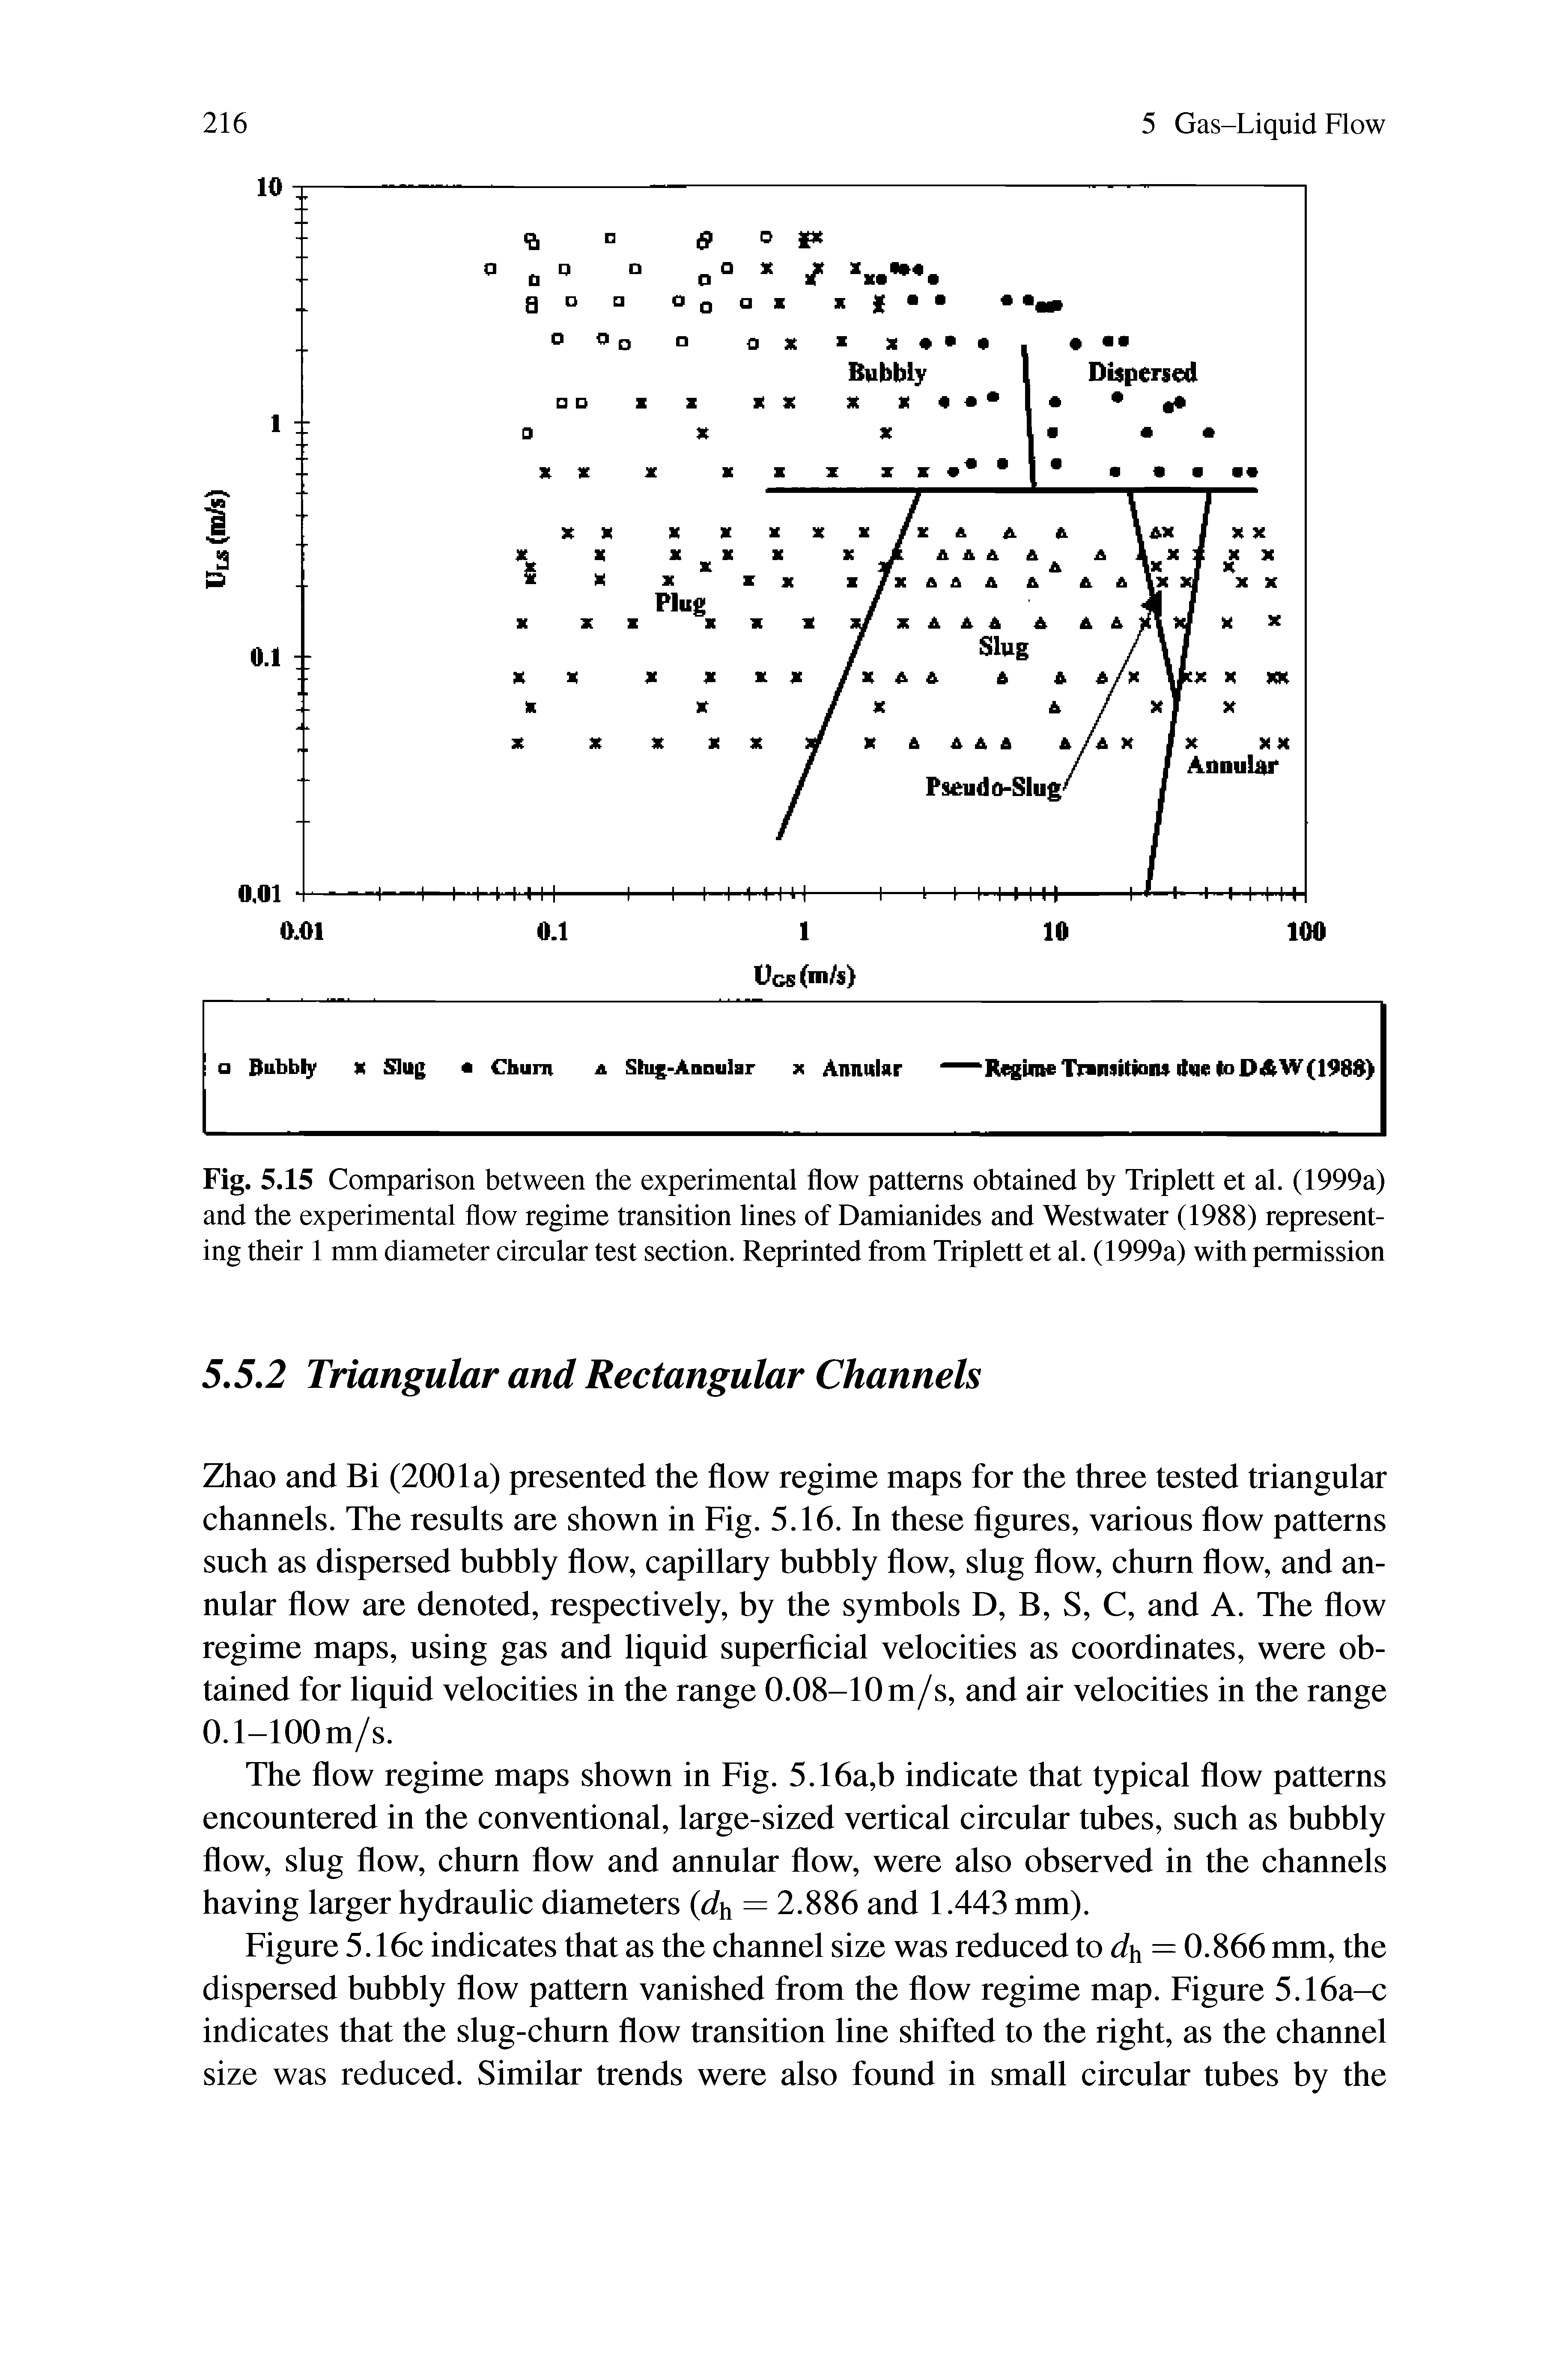 Fig. 5.15 Comparison between the experimental flow patterns obtained by Triplett et al. (1999a) and the experimental flow regime transition lines of Damianides and Westwater (1988) representing their 1 mm diameter cireular test section. Reprinted from Triplett et al. (1999a) with permission...